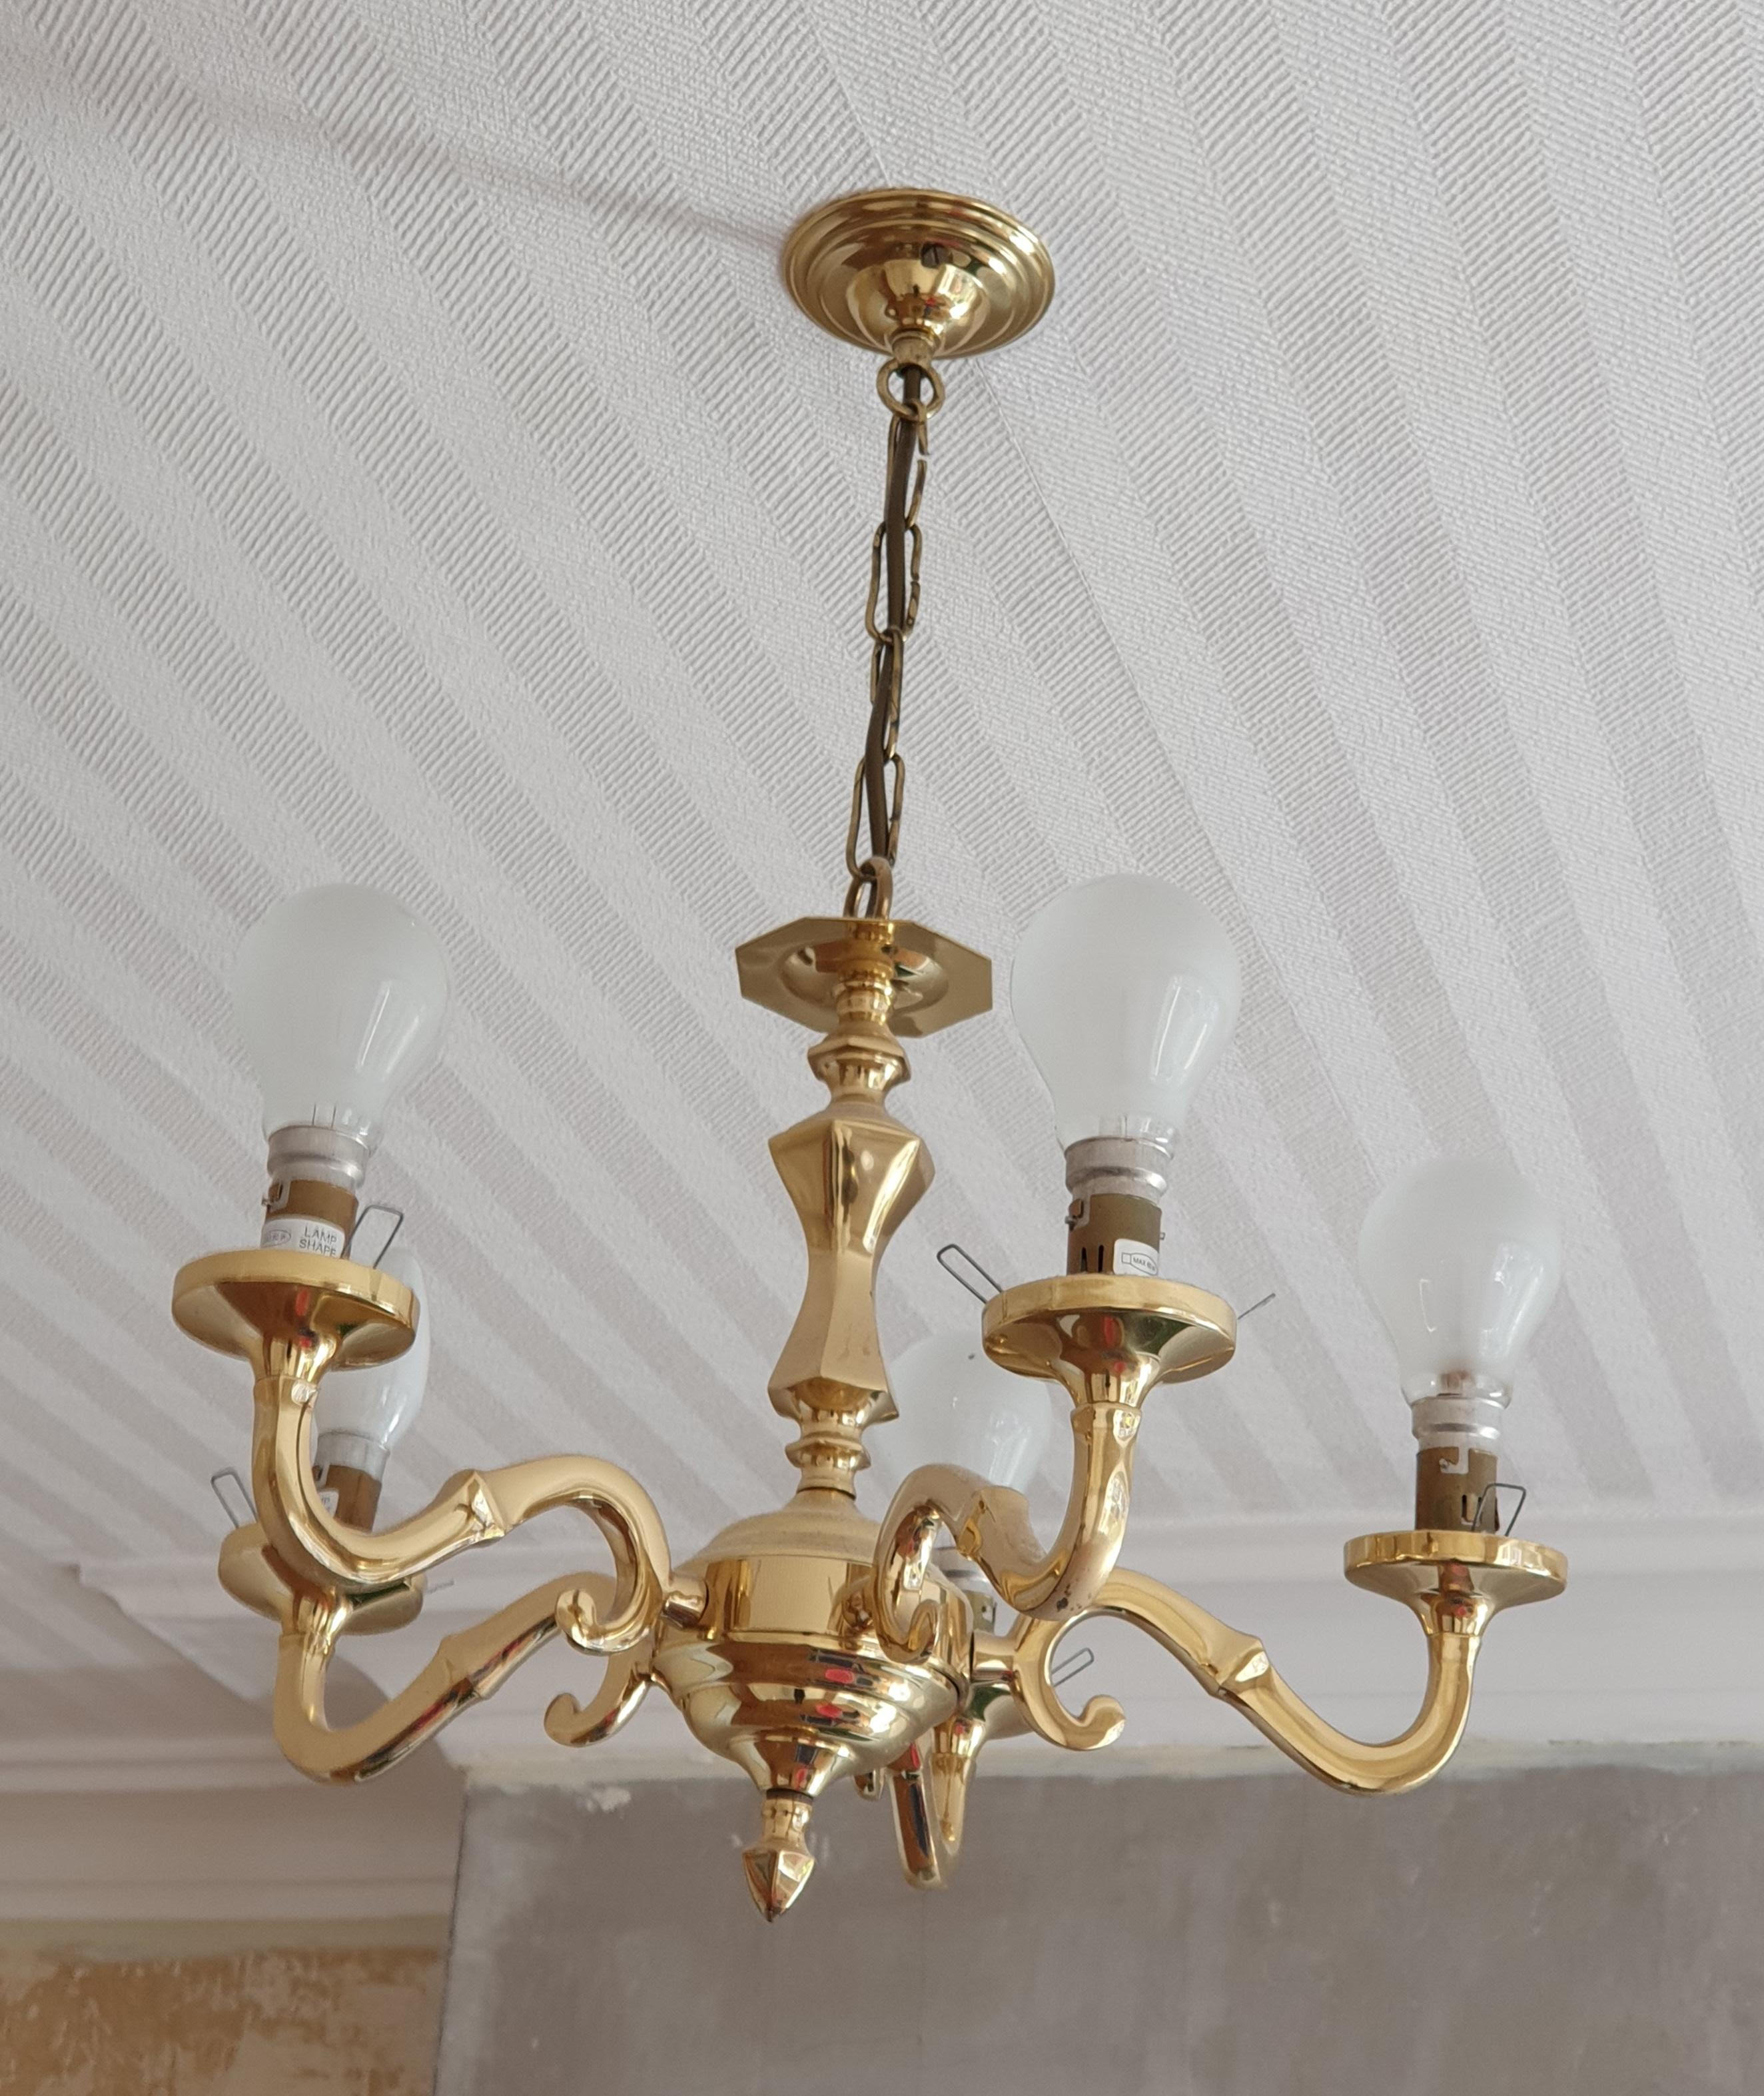 Two Brass Chandeliers ( 5 Branch without Shades ) 3 Branch with Glass Shades. - Image 2 of 2